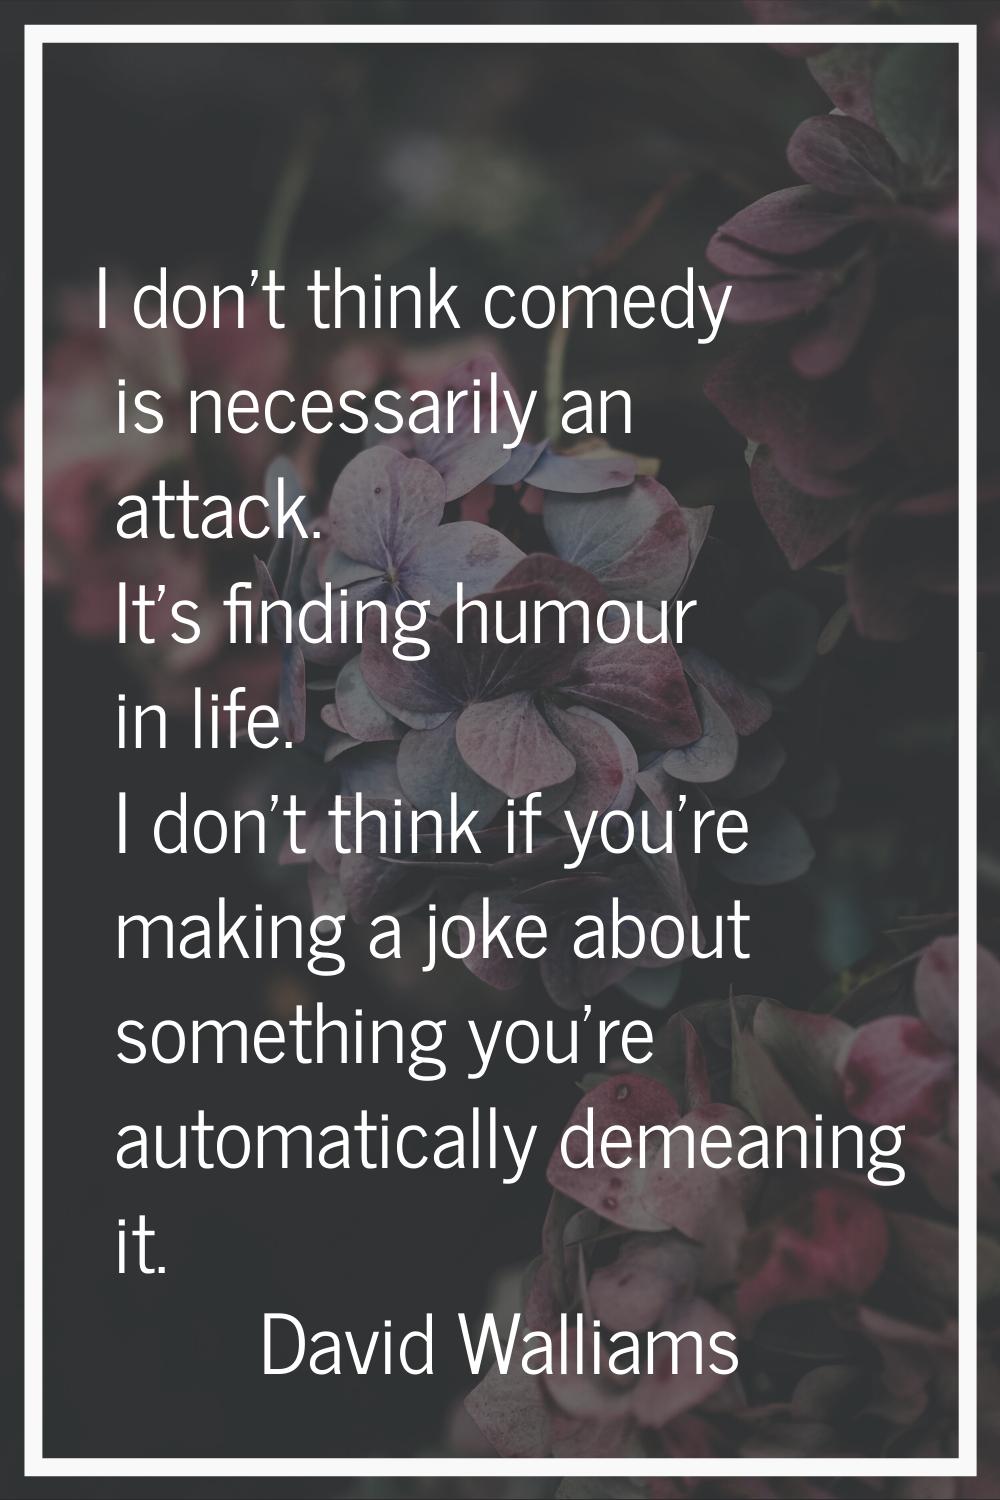 I don't think comedy is necessarily an attack. It's finding humour in life. I don't think if you're